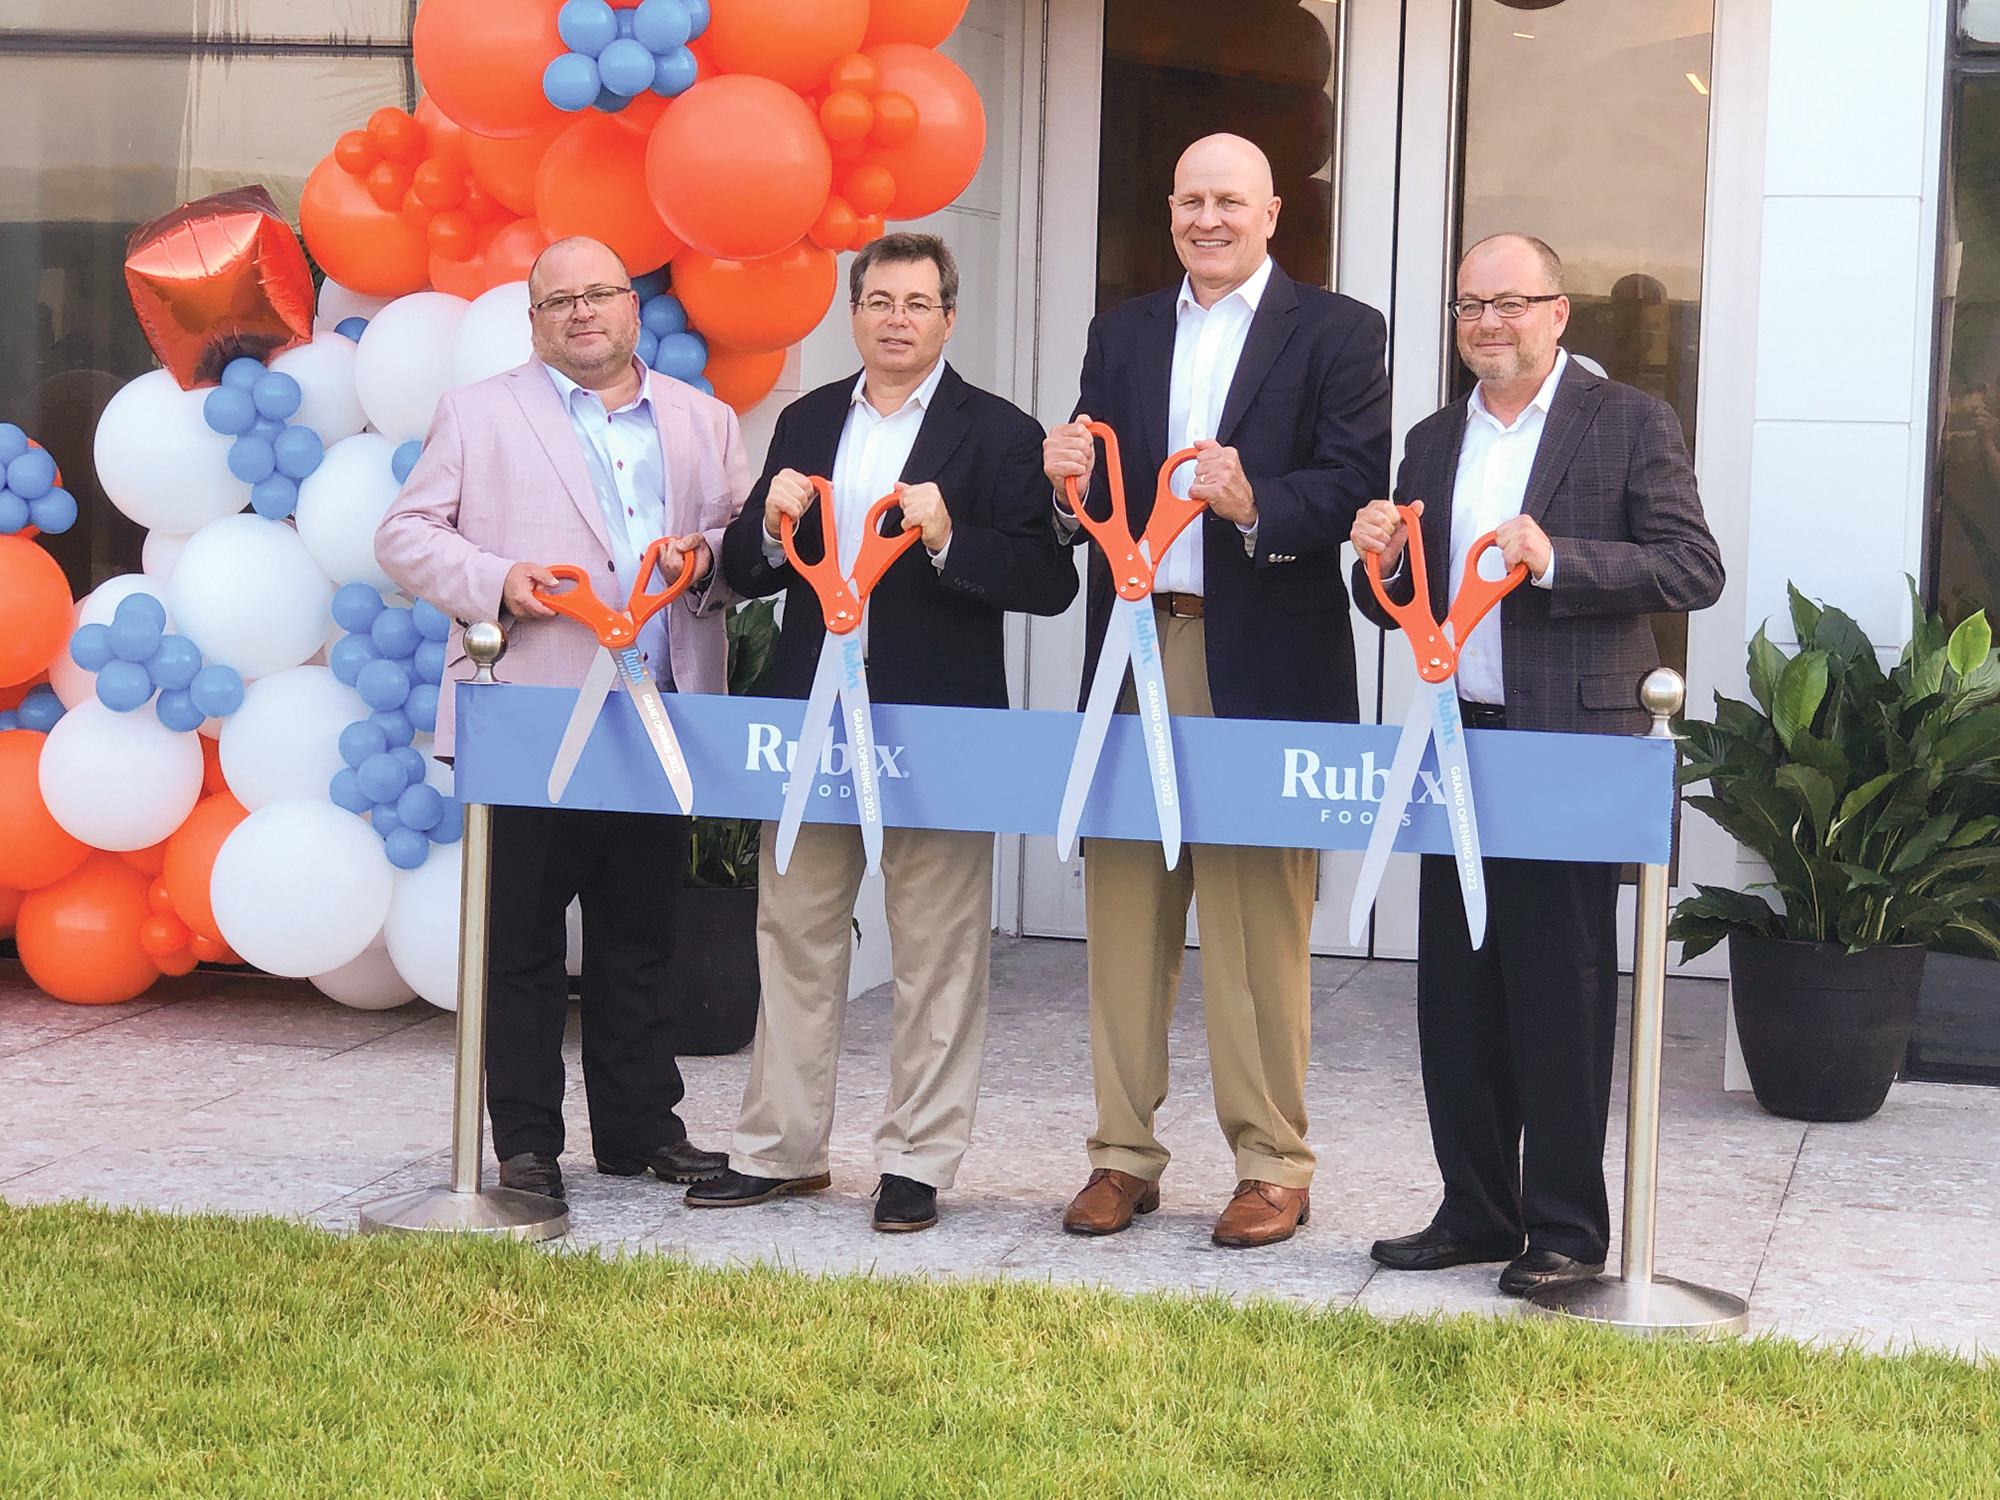 Rubix Foods Executive Vice President Jeffrey Block, CFO and COO Bill Block, President Midd McManus and CEO Andy Block display their branded scissors at a ribbon-cutting at the company’s new headquarters and Innovation Center.